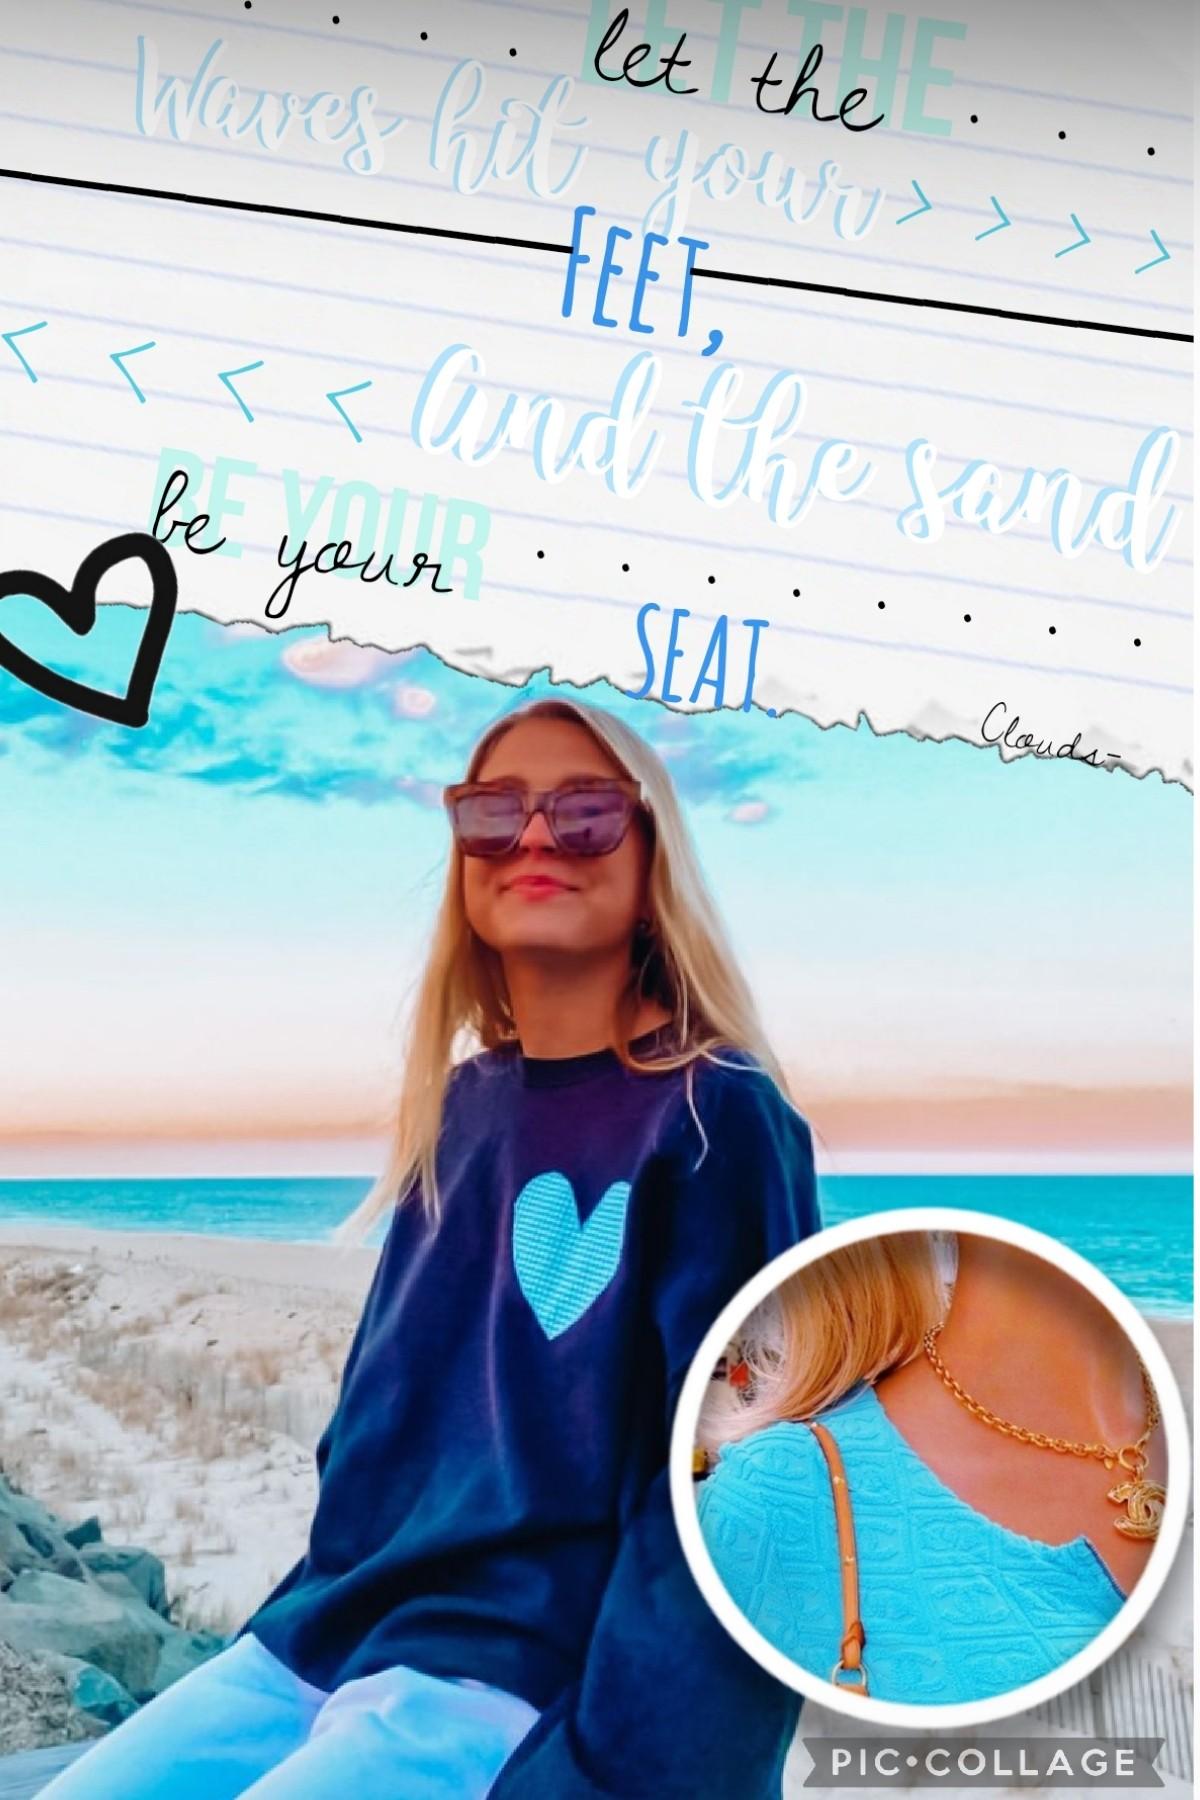             🦋⚡️TAP⚡️🦋

  heyy! so this time, I just made a collage which fits the theme of blue preppy aesthetic! ❤️ no inspo creds, I just muddled around with pngs and stuff 😅💕
  QOTD: Favourite type of ice cream flavour? 🍦
   AOTD: Vanilla! 😅💞